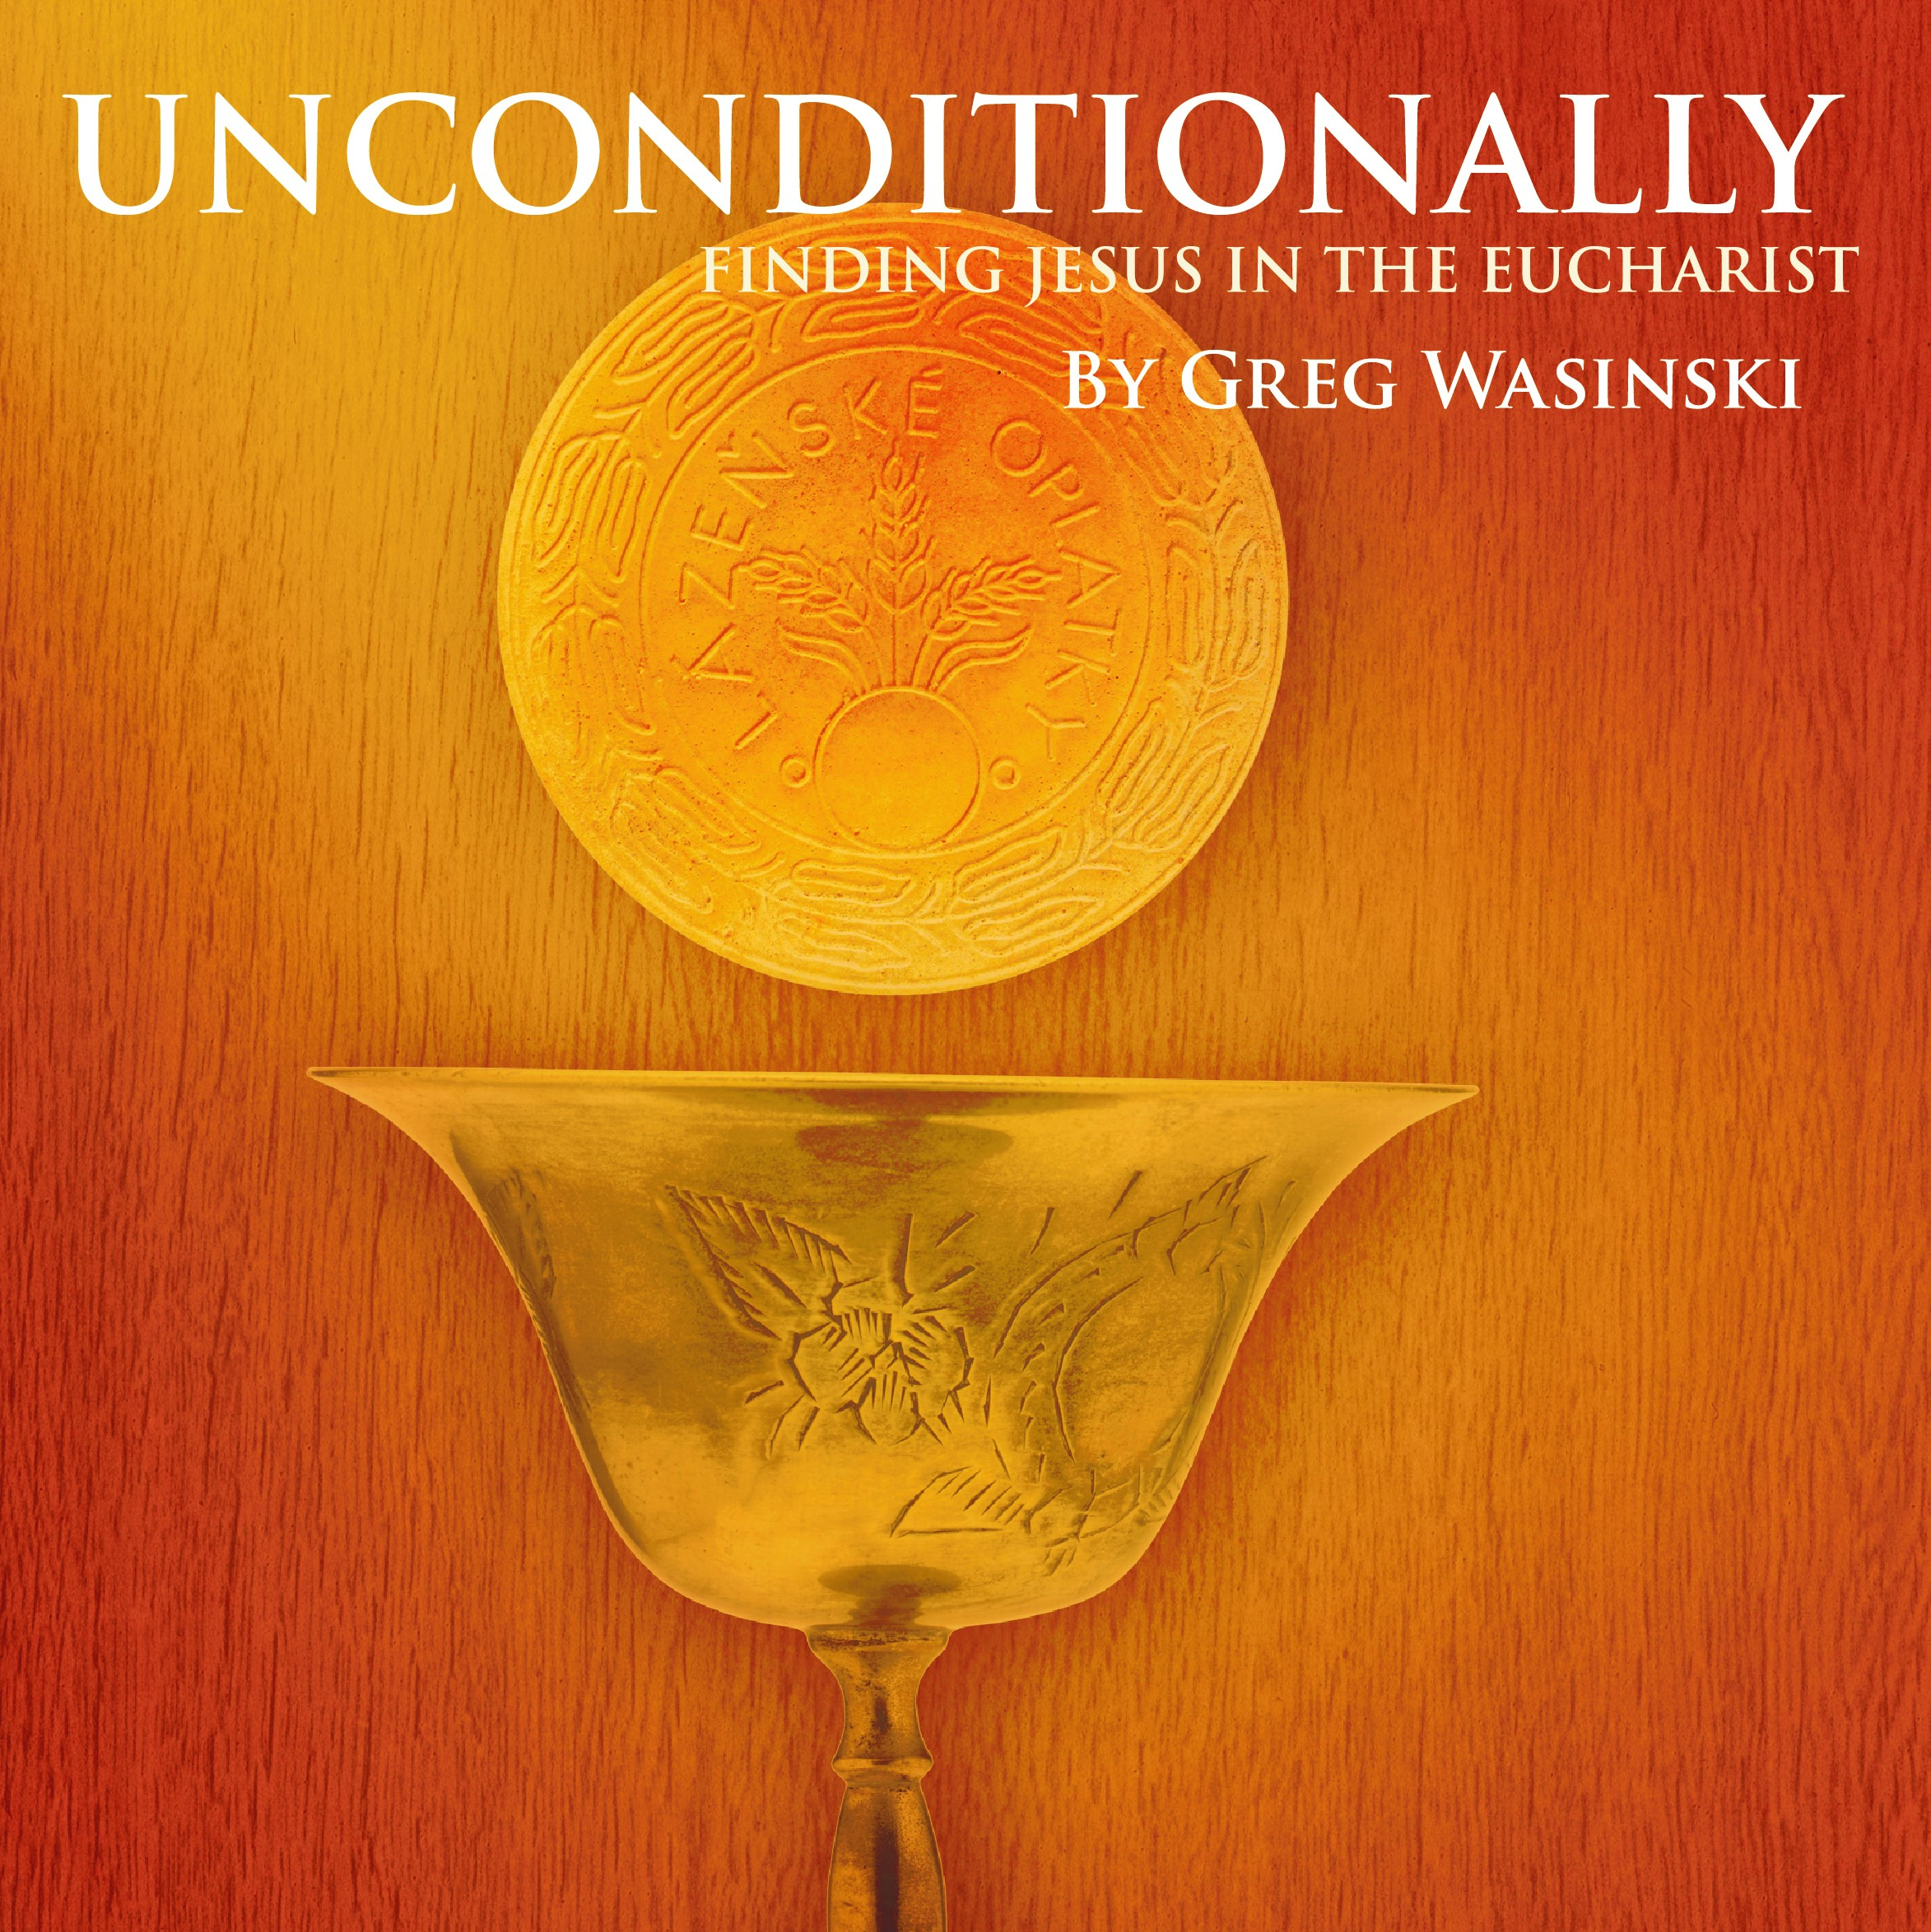 Unconditionally: Finding Jesus in the Eucharist